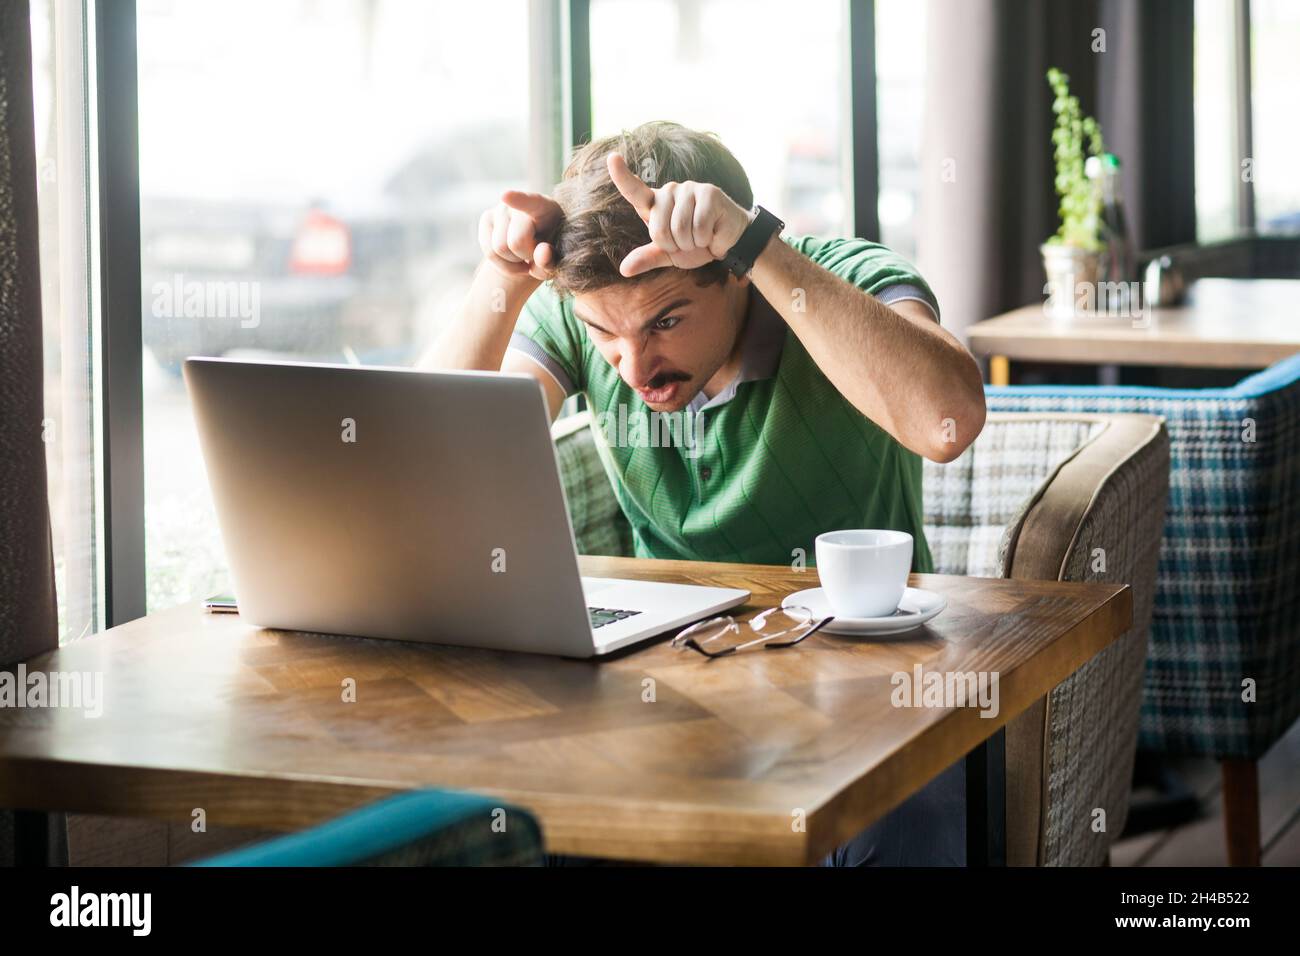 Portrait of angry businessman wearing green T-shirt at work, looking at laptop monitor, showing bull horn gesture, threatening to attack. Indoor shot near big window, cafe background. Stock Photo